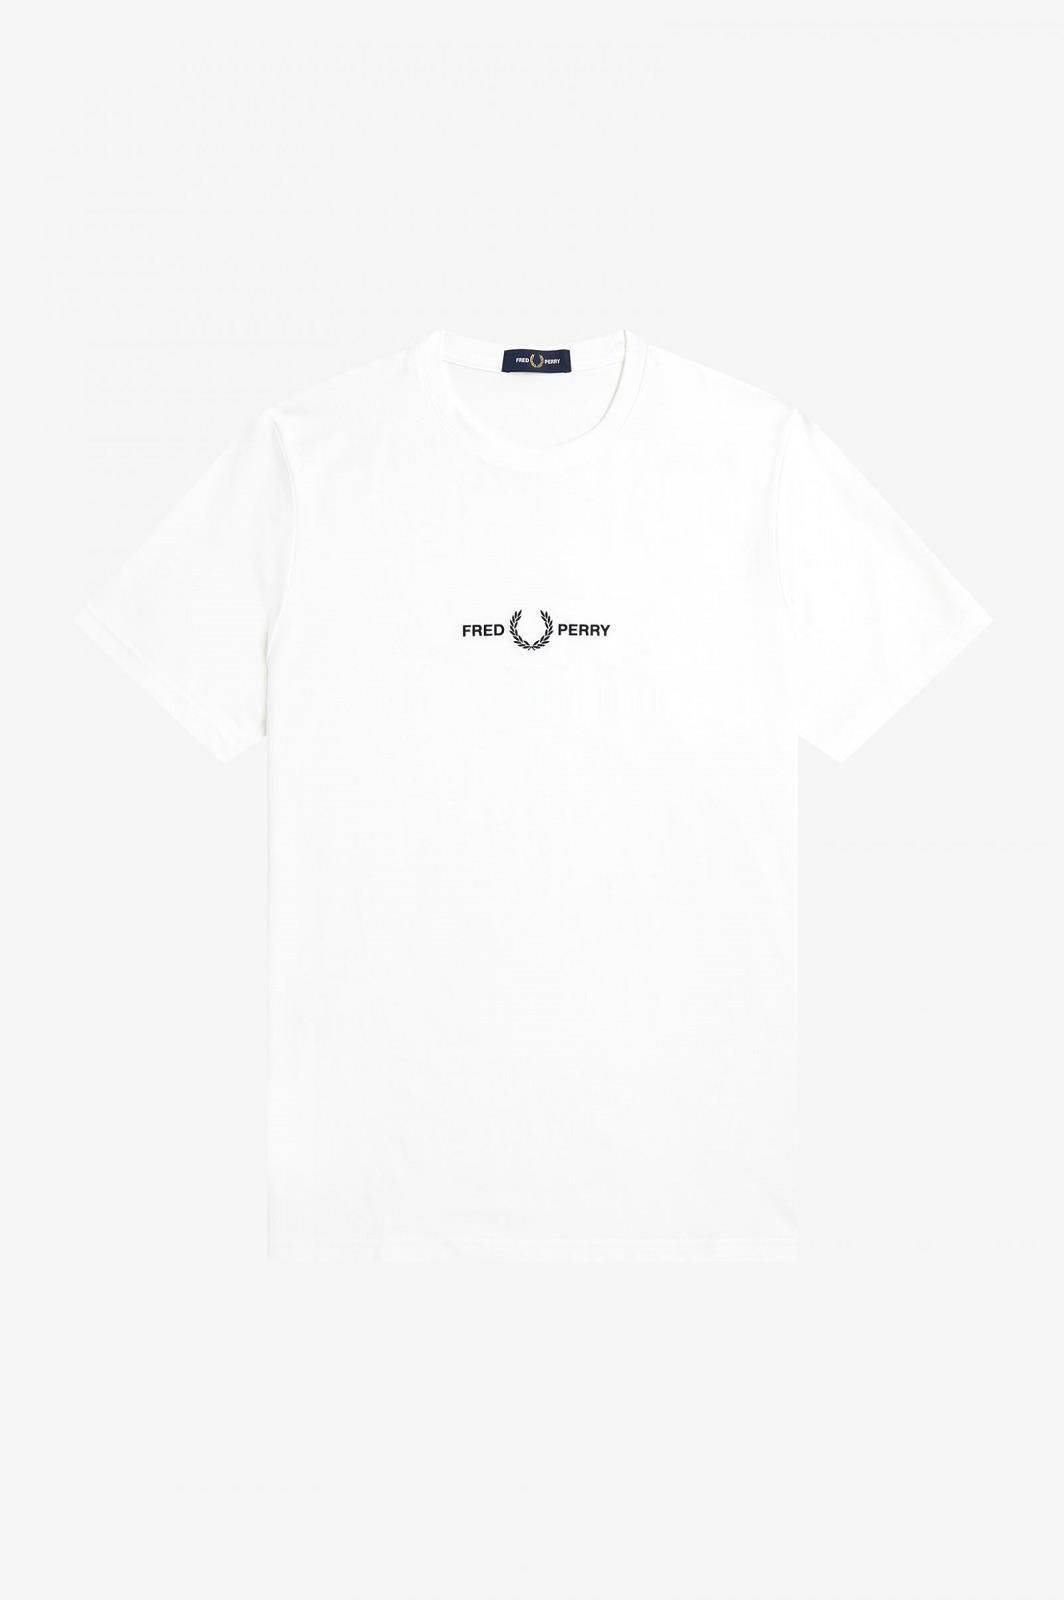 Fred Perry Embroidered T-Shirt White  (M4580-100) - Schoenen Caramel (Sint-Job-in-’t-Goor)